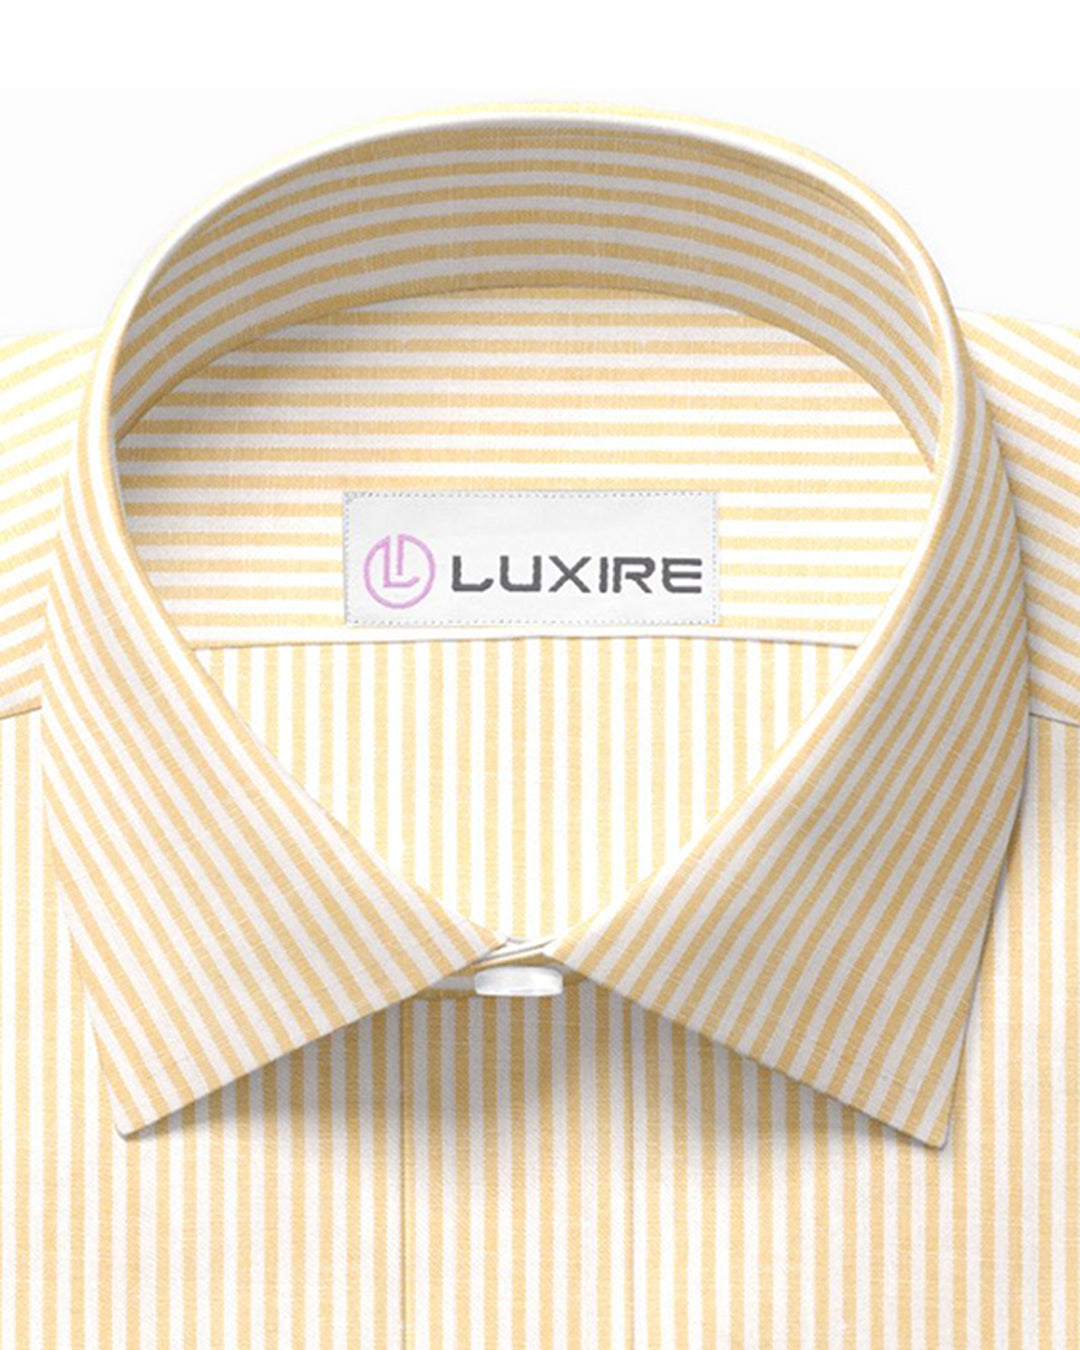 Collar of the custom linen shirt for men in yellow candystripes by Luxire Clothing